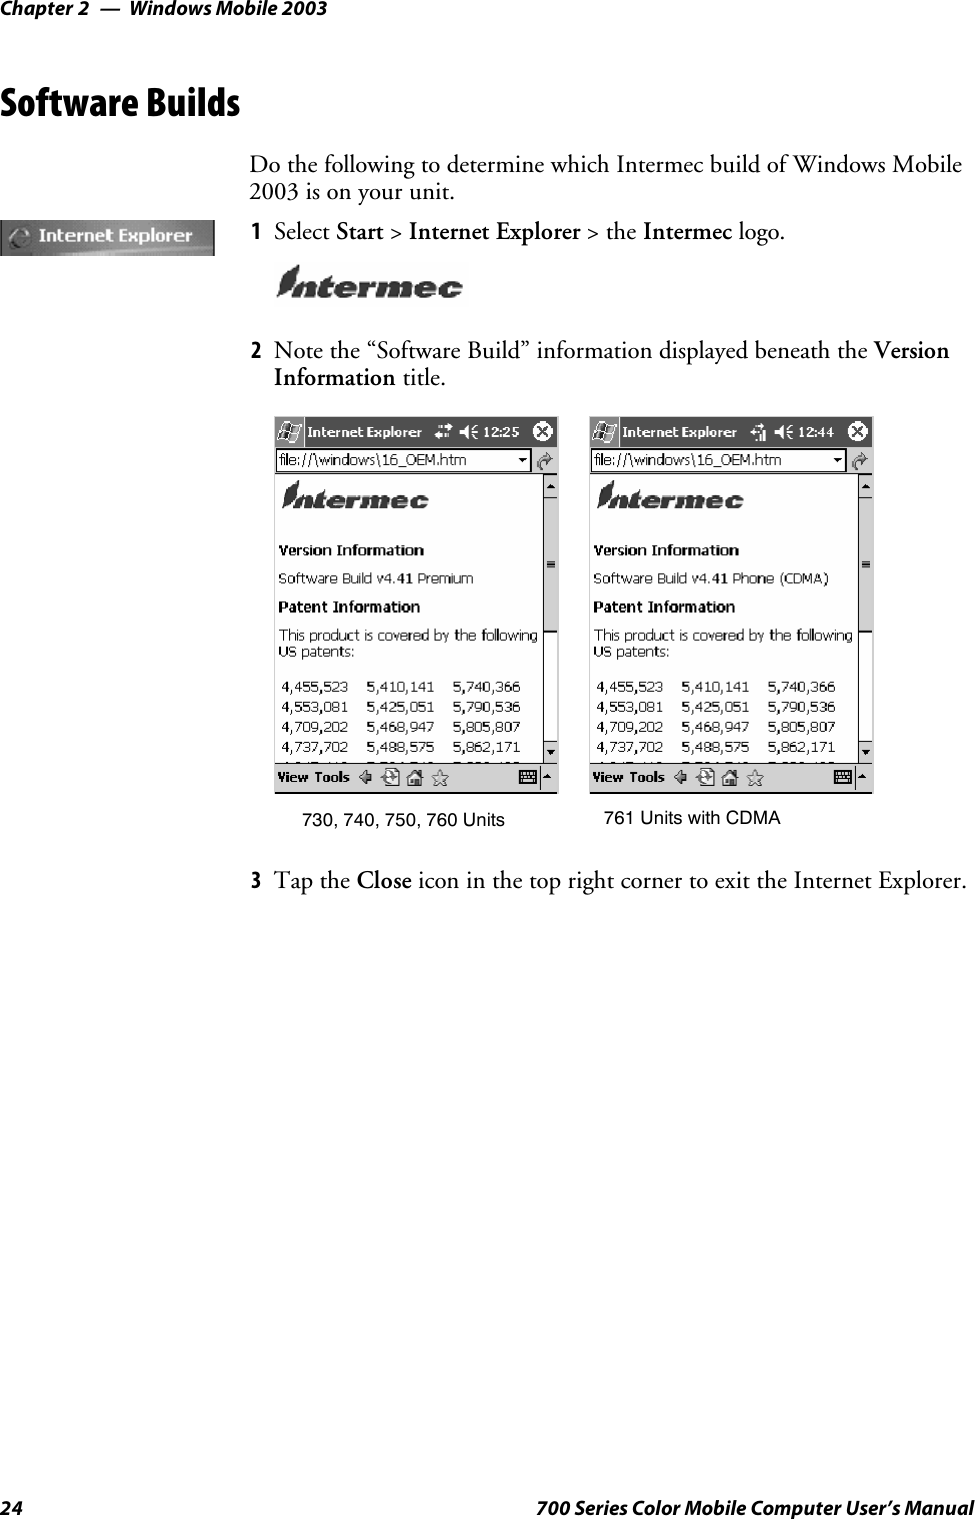 Windows Mobile 2003Chapter —224 700 Series Color Mobile Computer User’s ManualSoftware BuildsDo the following to determine which Intermec build of Windows Mobile2003 is on your unit.1Select Start &gt;Internet Explorer &gt;theIntermec logo.2Note the “Software Build” information displayed beneath the VersionInformation title.730, 740, 750, 760 Units 761 Units with CDMA3Tap the Close icon in the top right corner to exit the Internet Explorer.